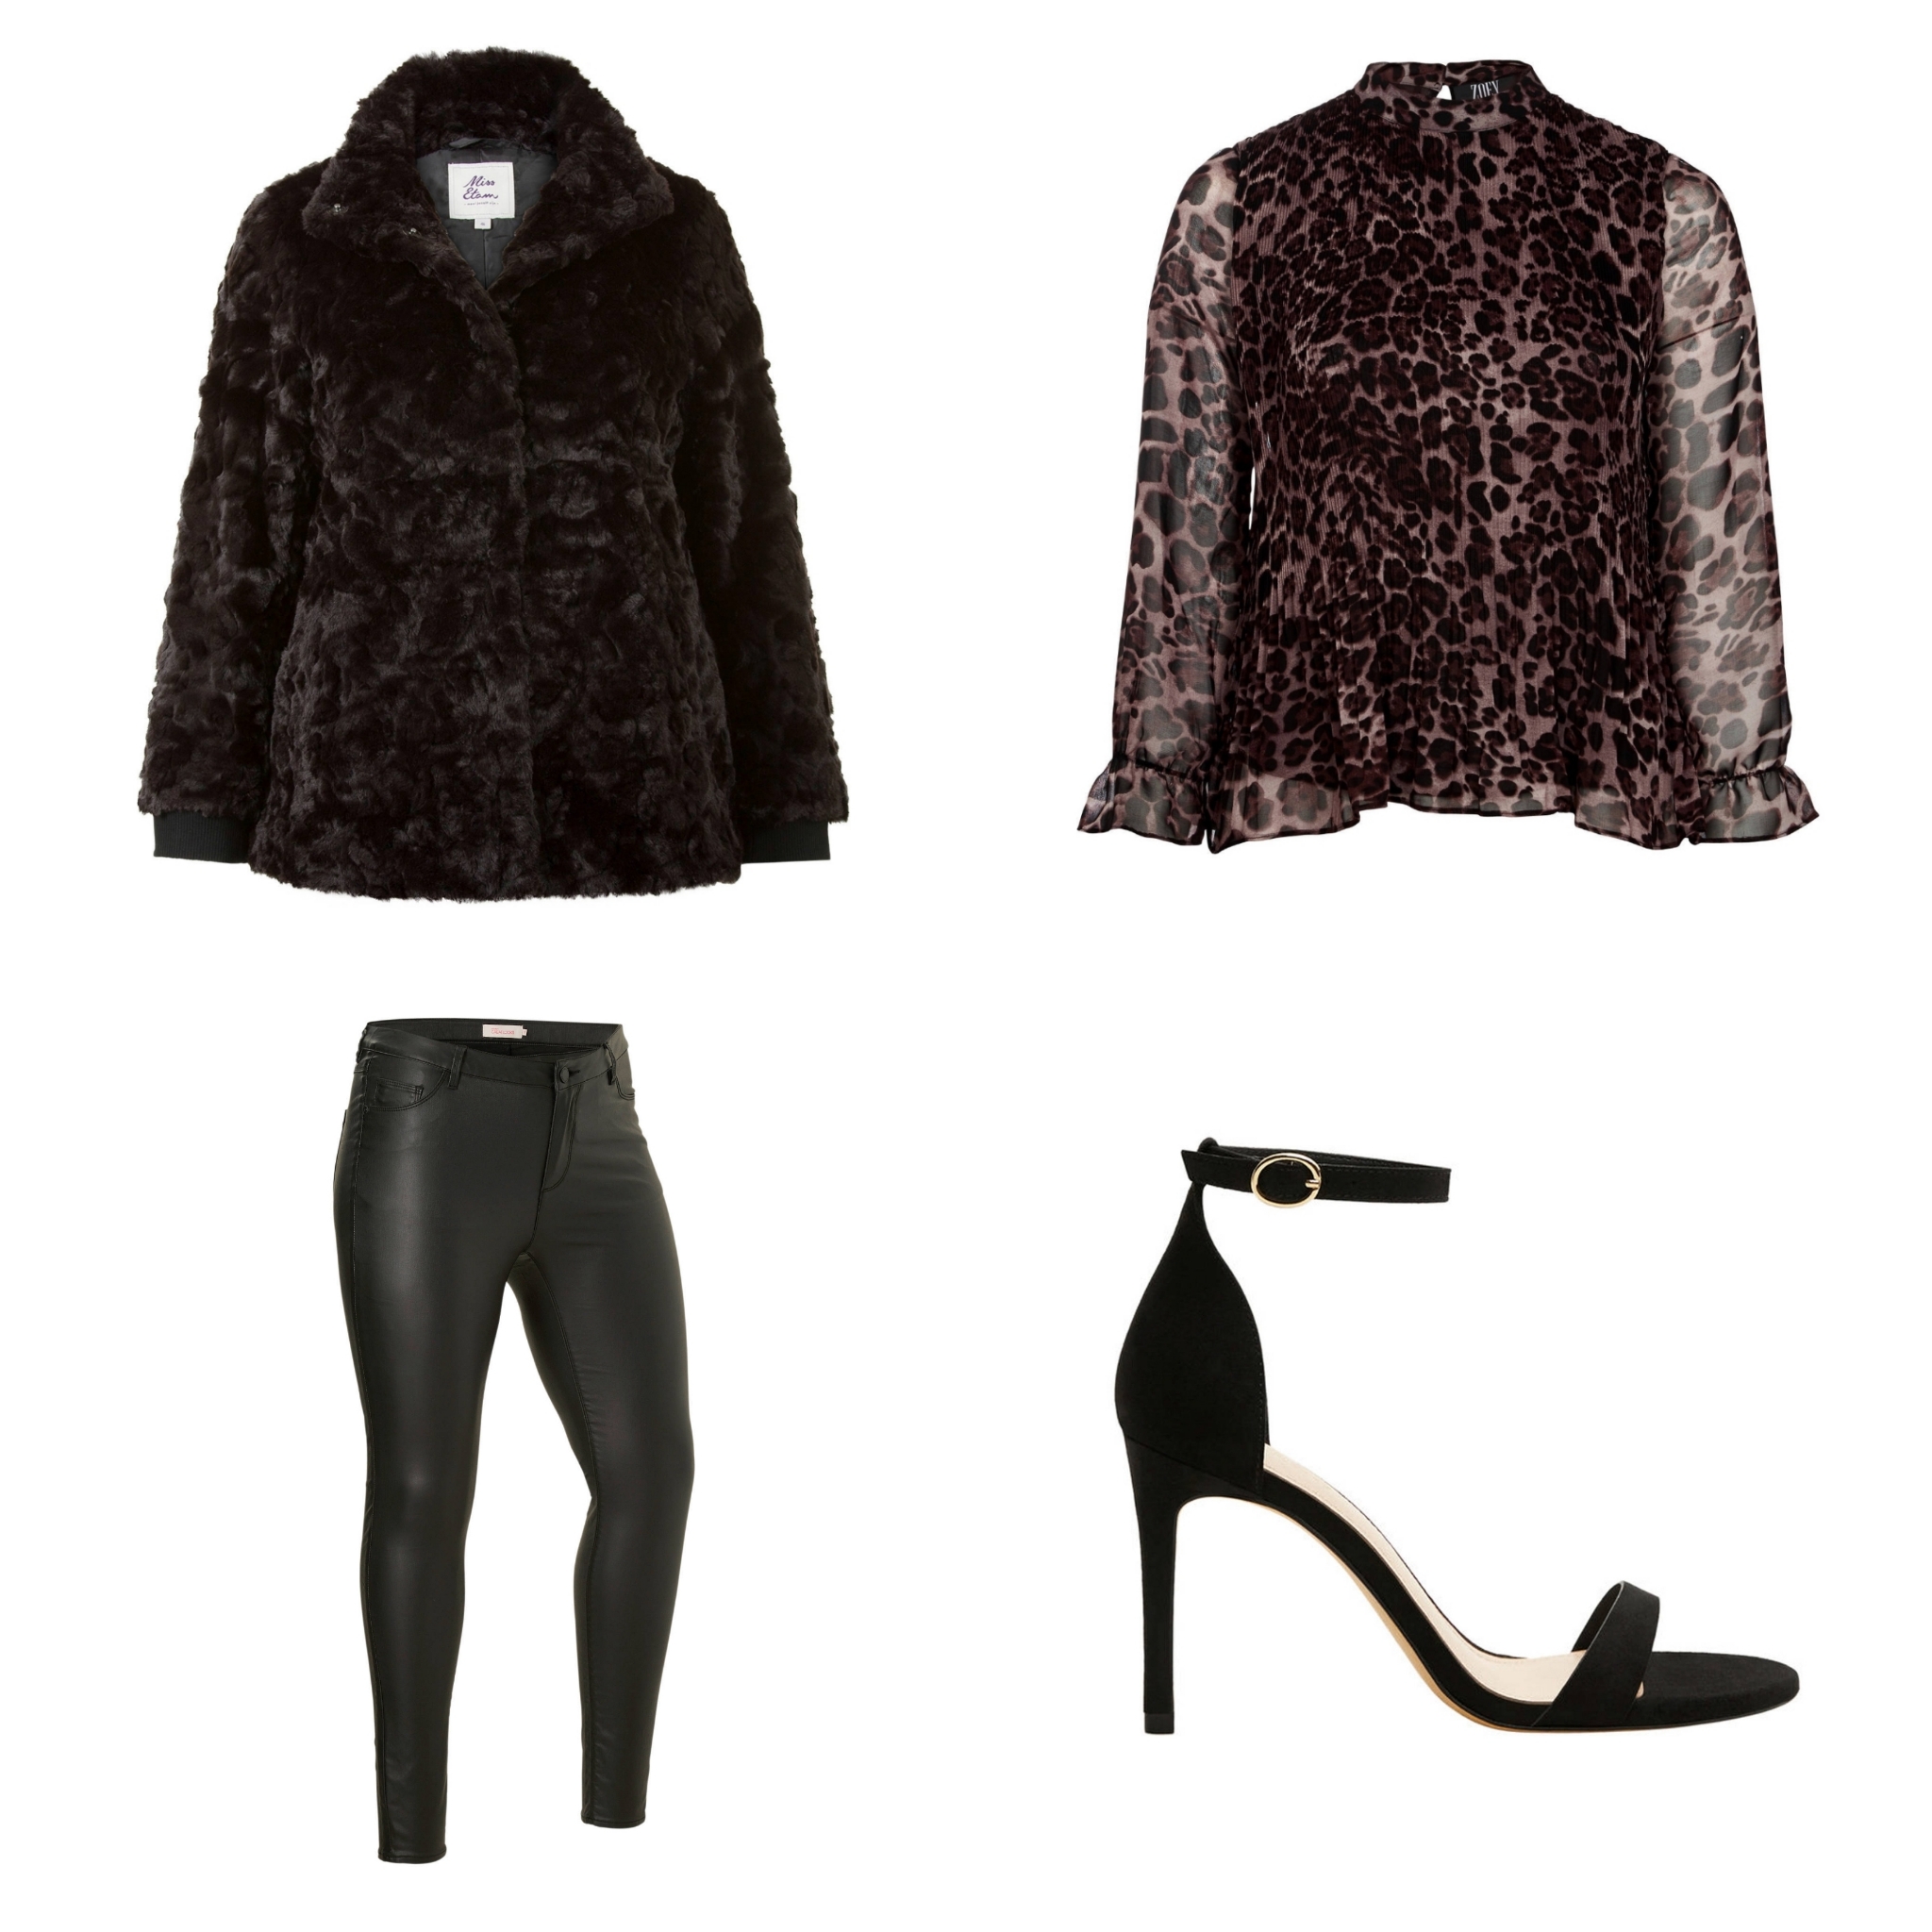 Plus Size Fashion Friday: The animal print continues